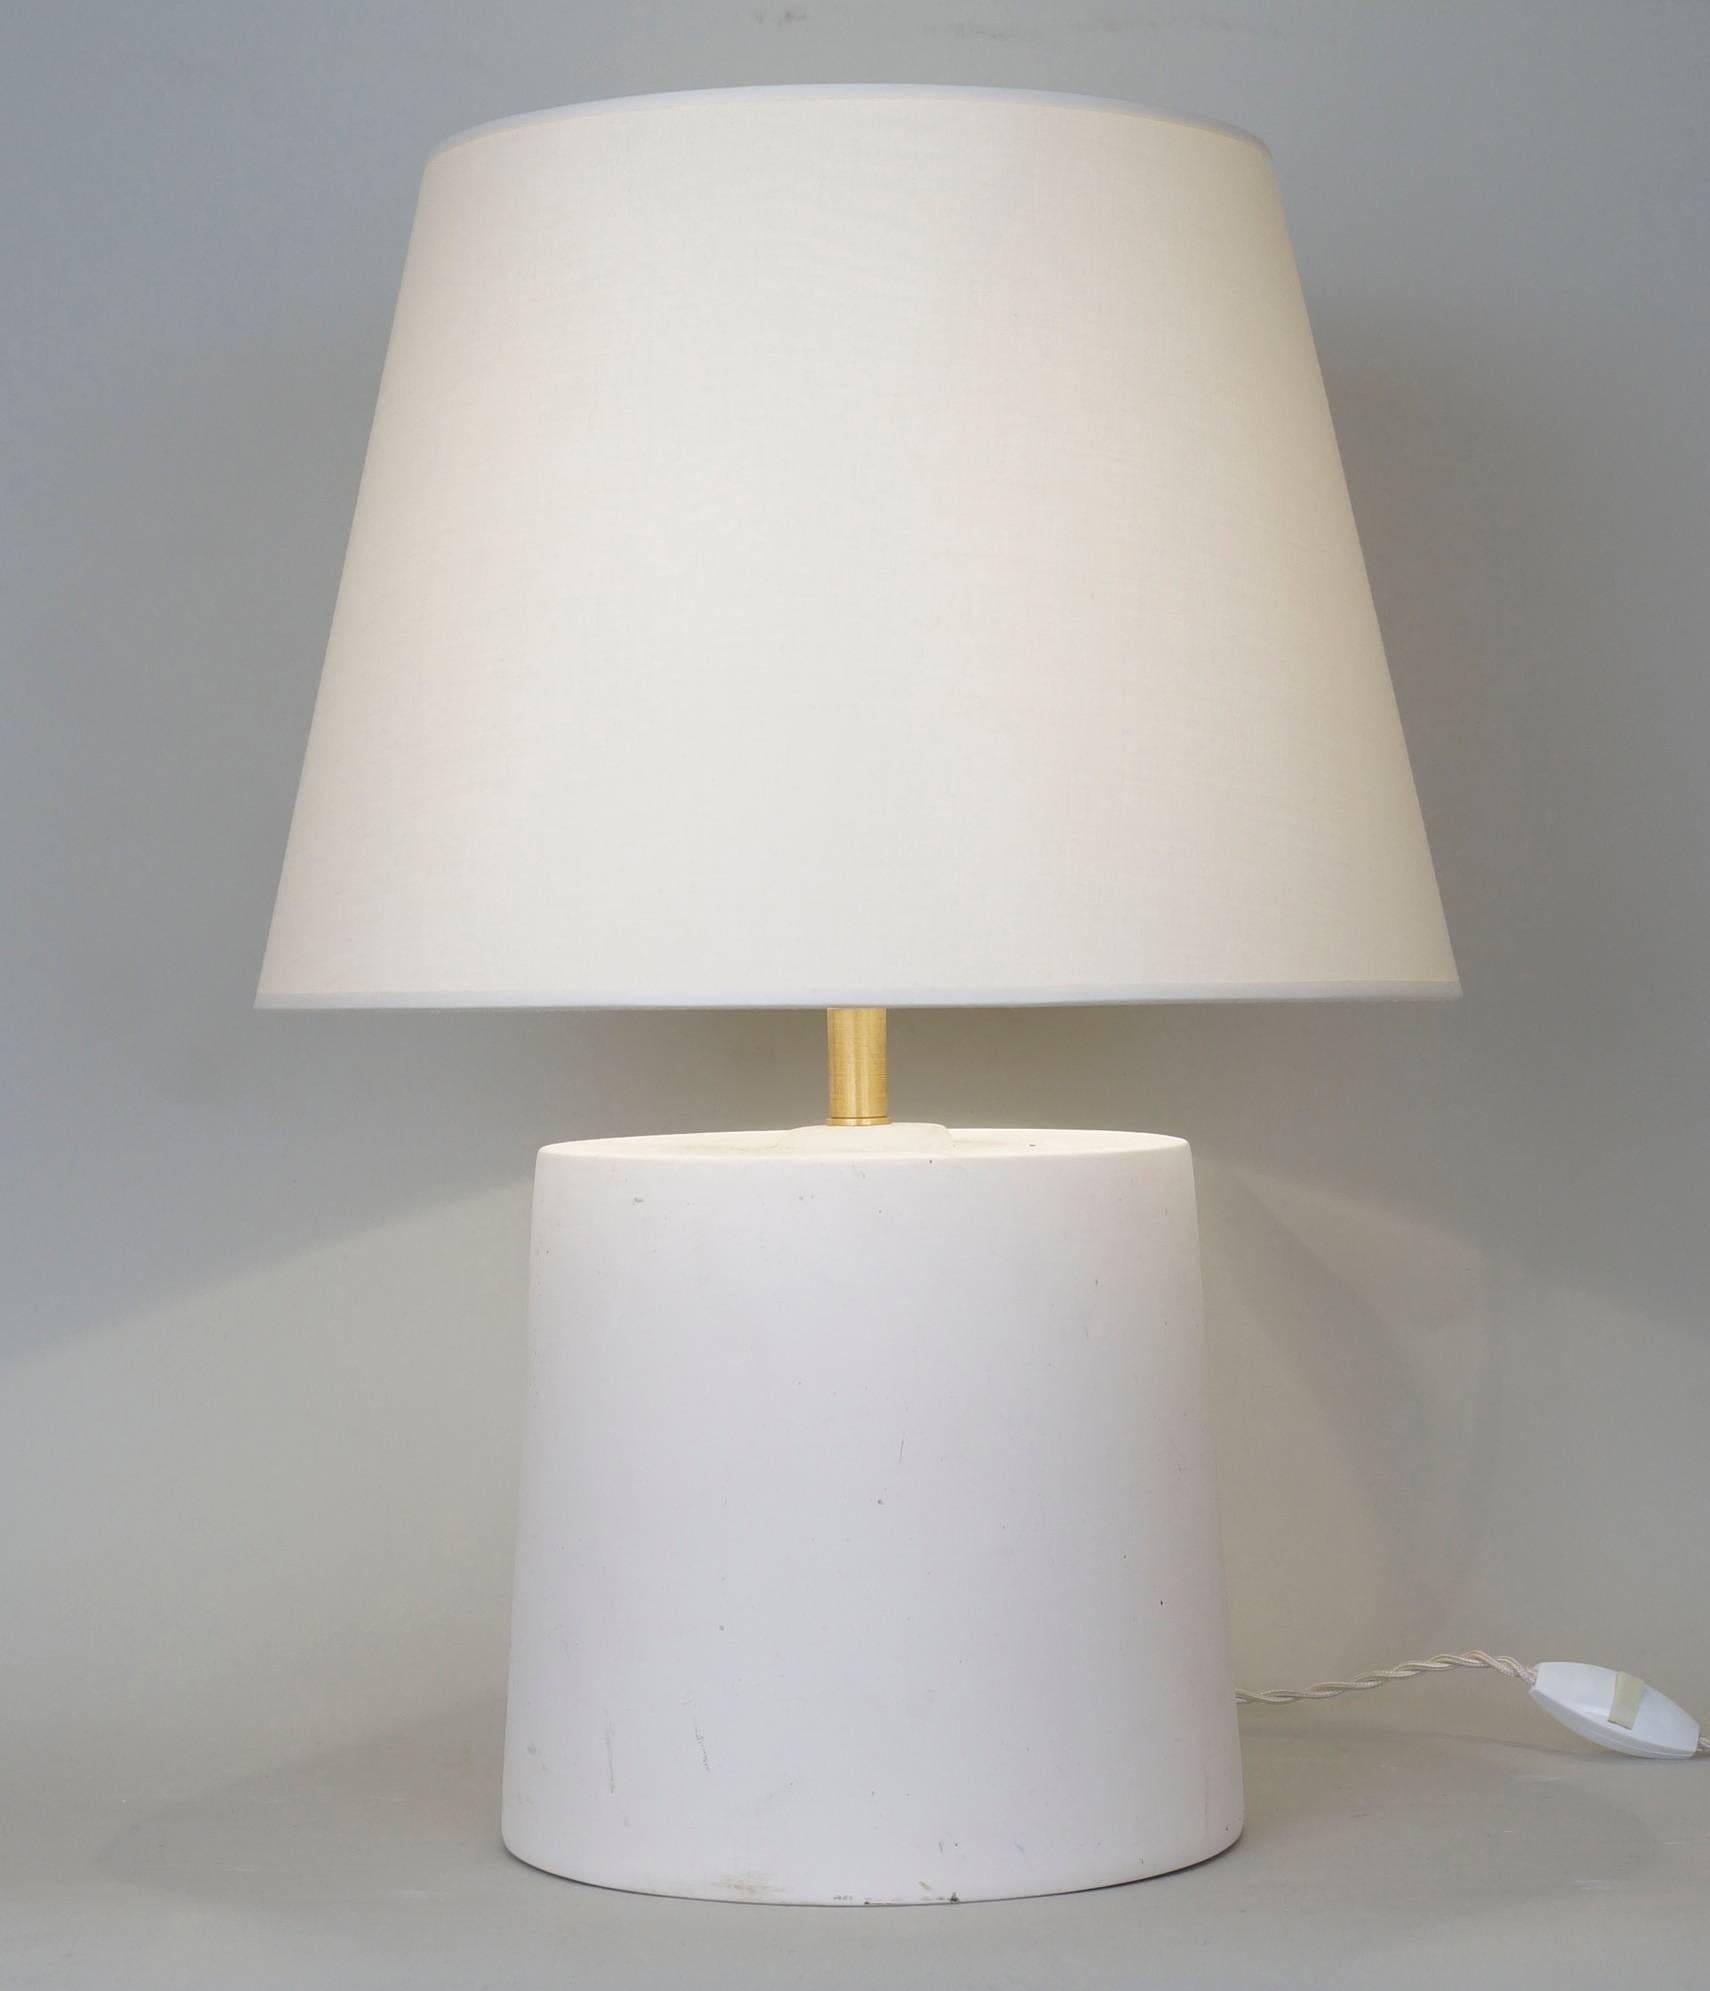 Unglazed ceramic table lamp in white biscuit, shade custom-made, rewired with twisted silk cord and olive switch line and US compatibility plug on request.
Measures: Ceramic only H 21 cm. in 8.3 H
with shade H 59 cm. in 23.2 H.